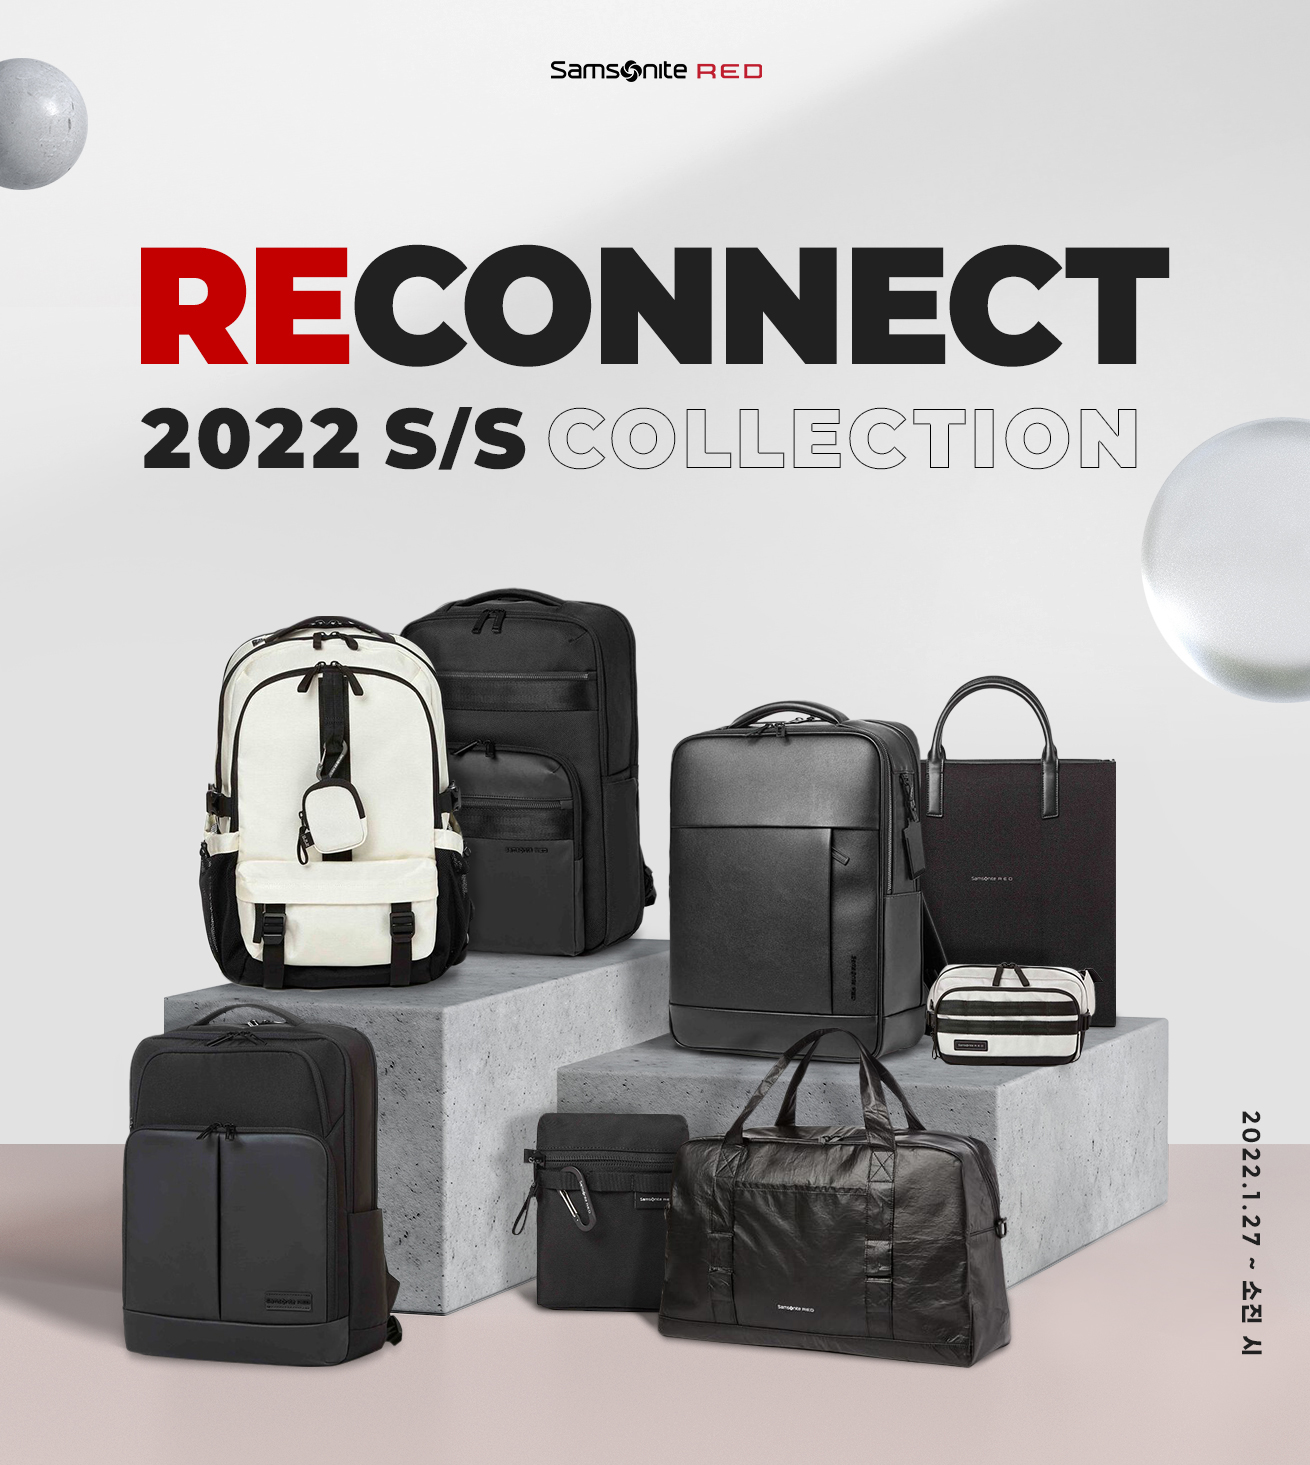 RECONNECT 2022 S/S COLLECTION 2022.1.27 ~ 소진 시 